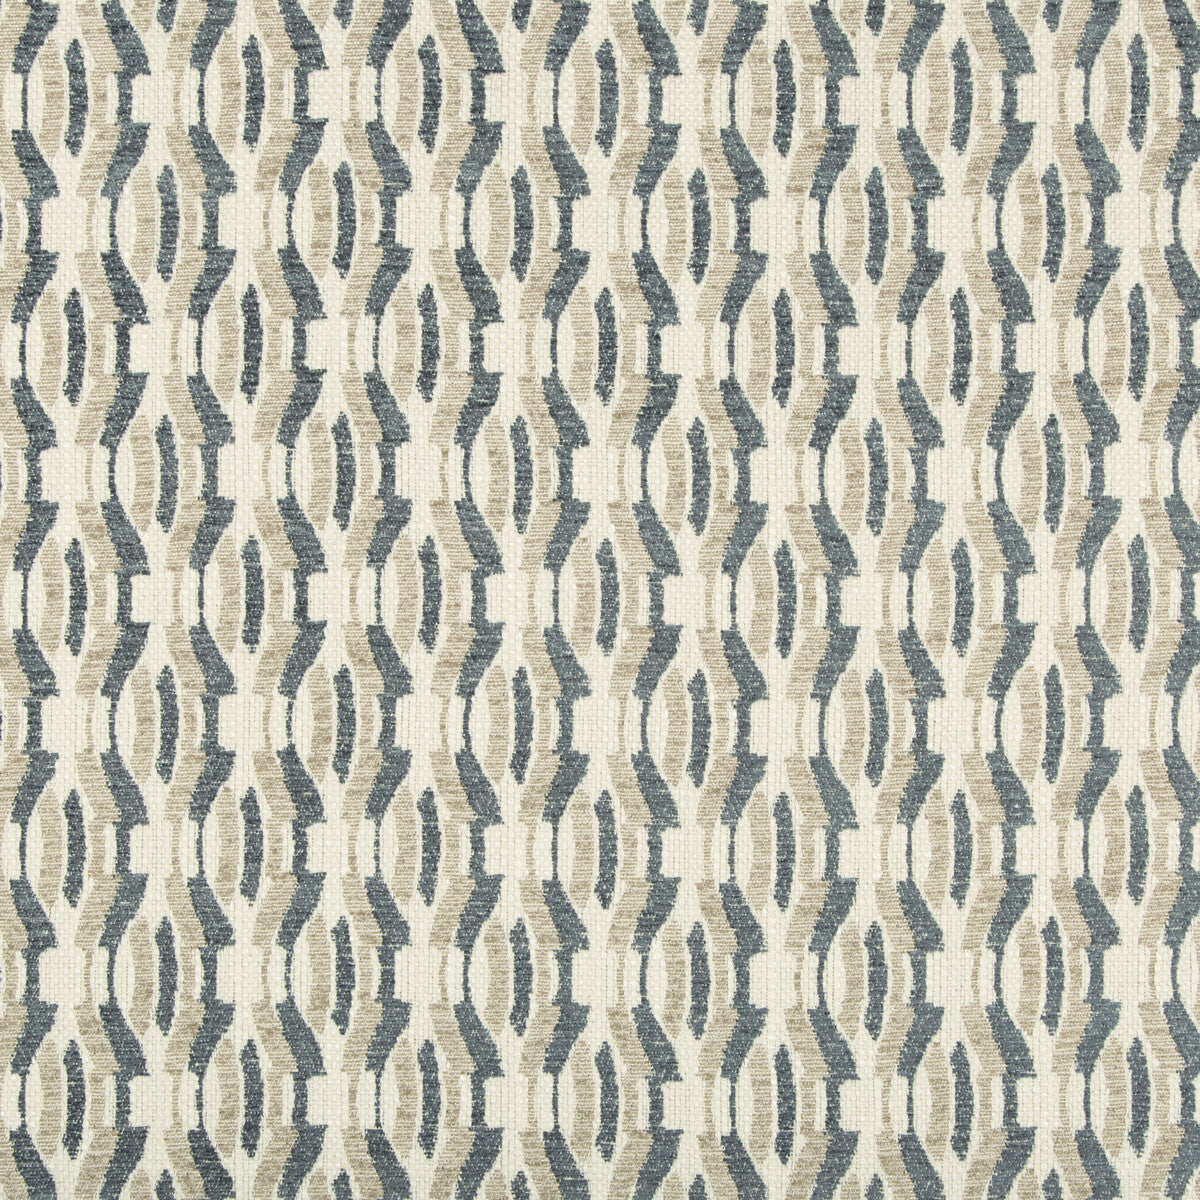 Agate Weave fabric in sea wave color - pattern GWF-3748.5.0 - by Lee Jofa Modern in the Gems collection